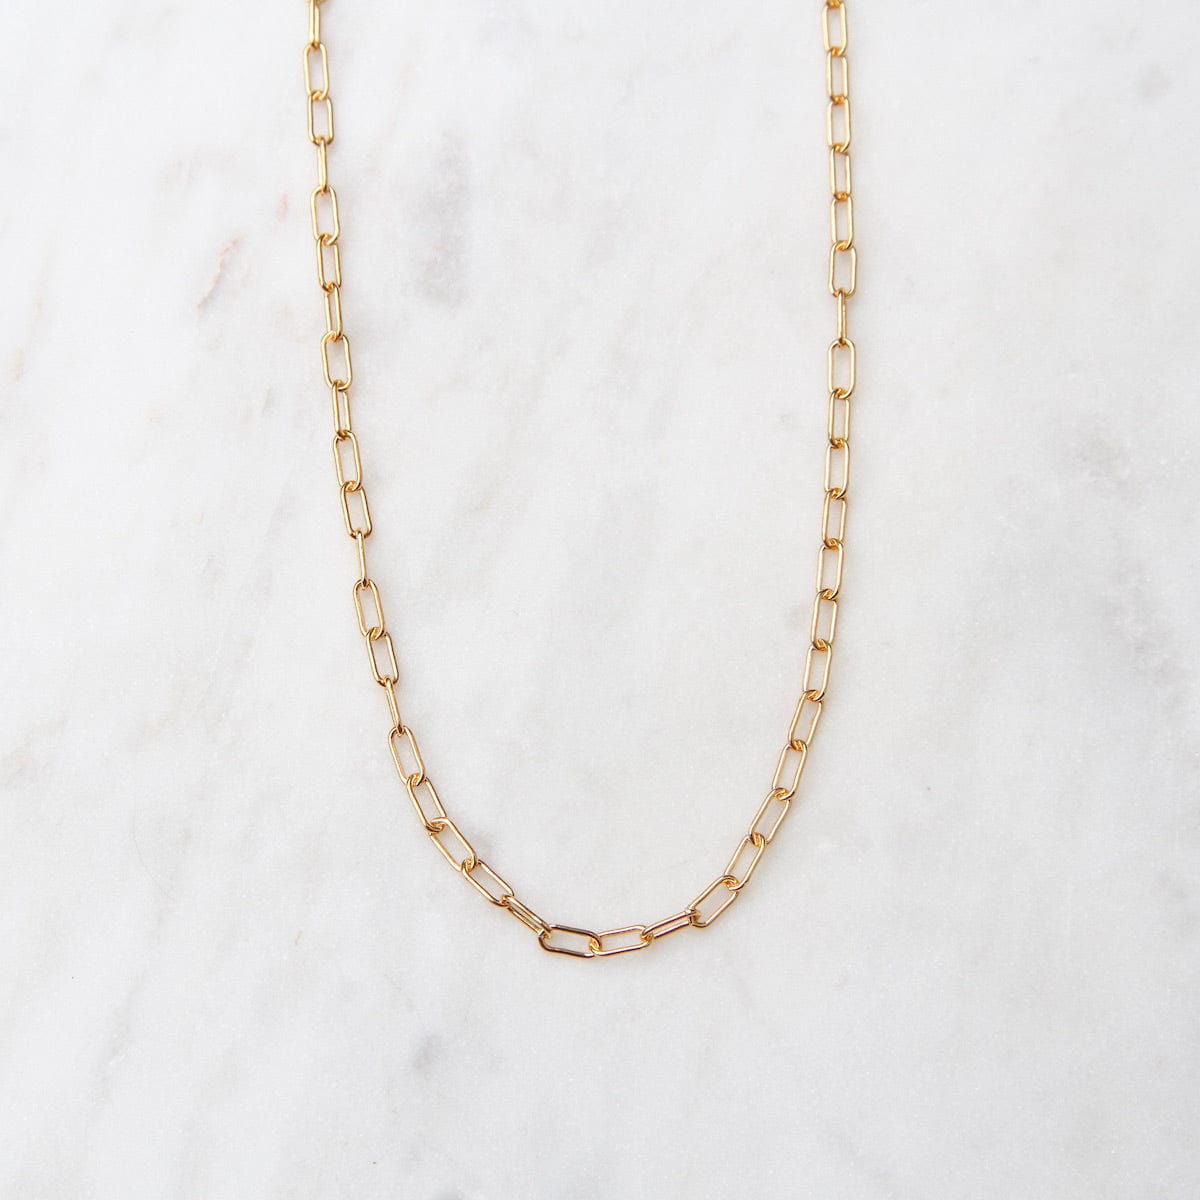 NKL-GF 18" Gold Filled Round Drawn Cable Chain